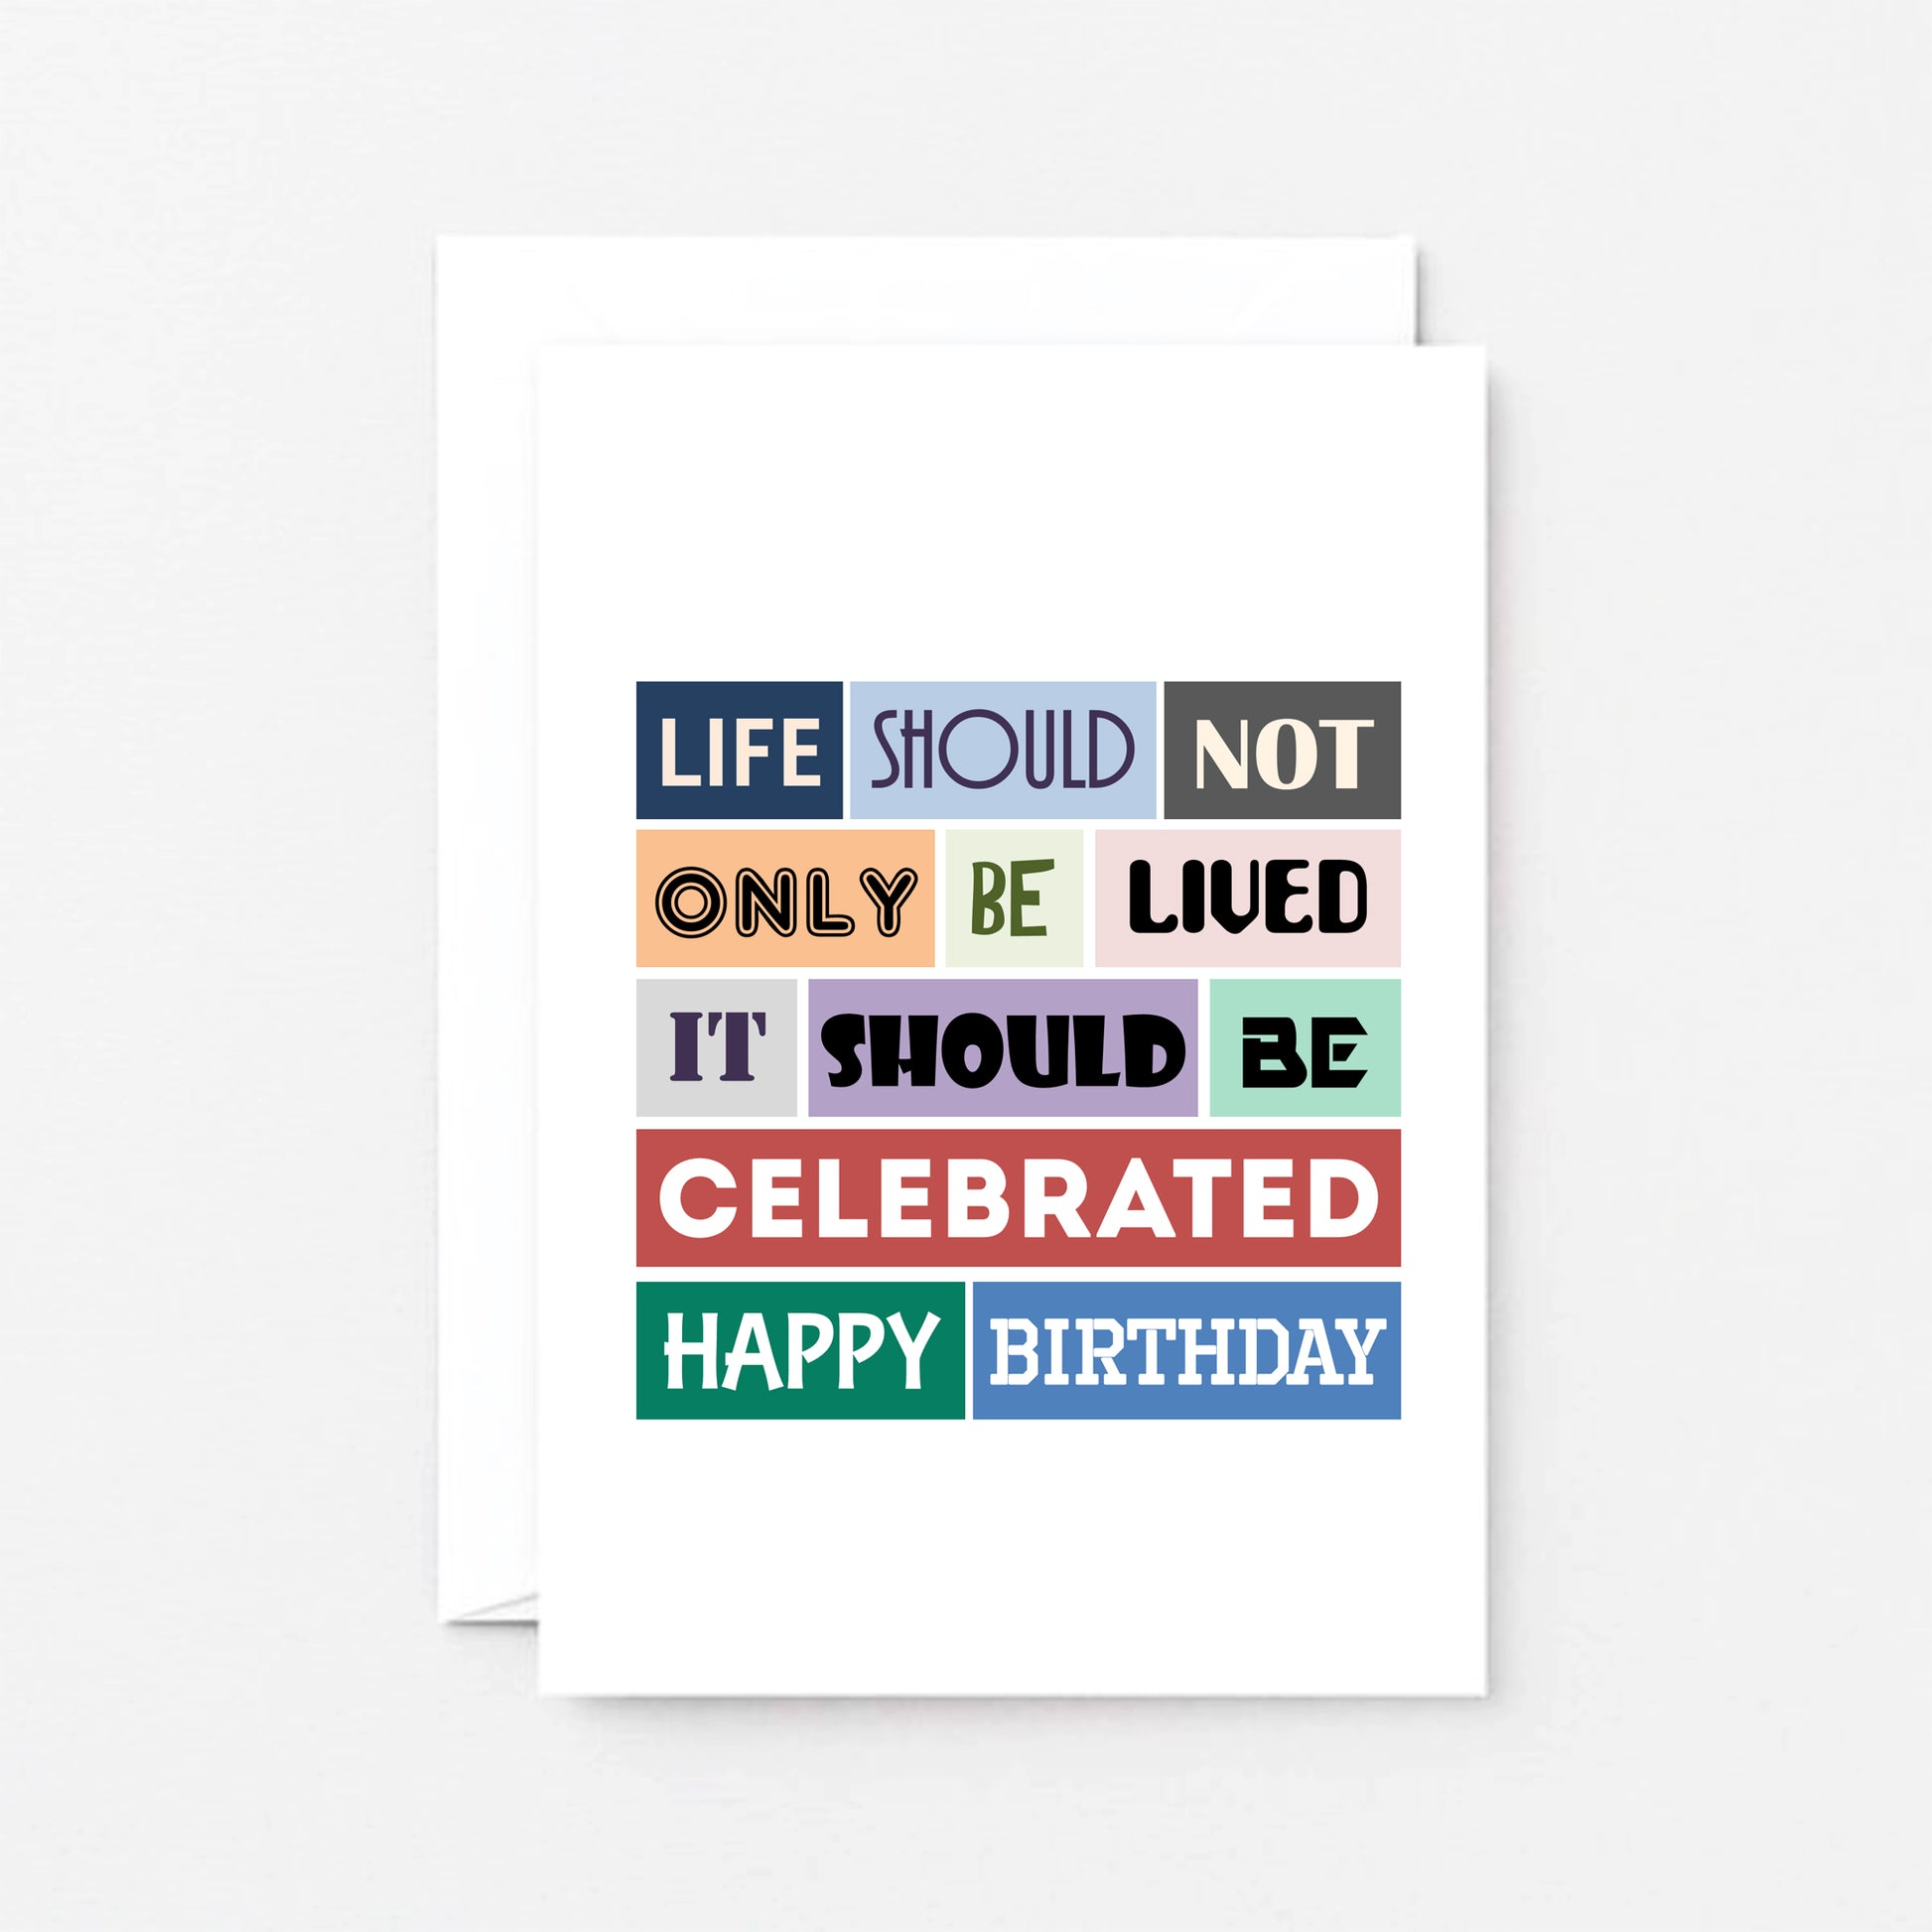 Birthday Card by SixElevenCreations. Reads Life should not only be lived. It should be celebrated. Happy birthday. Product Code SE0113A6